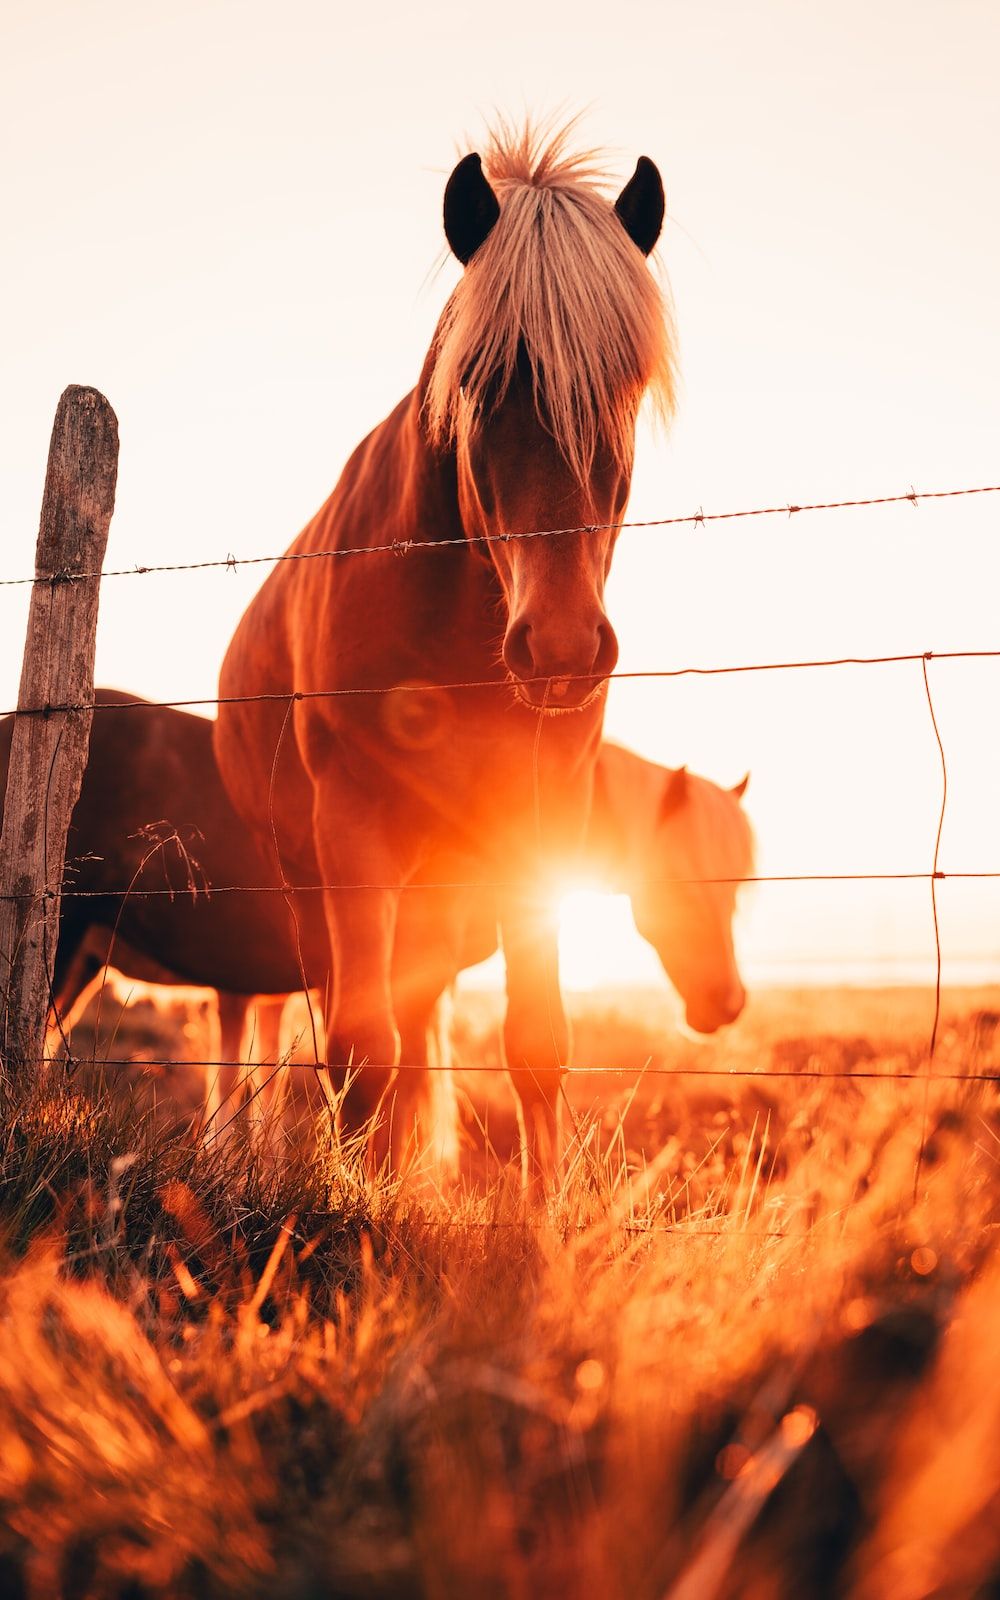 Two brown horses standing near barbed wire fence during golden hour - Horse